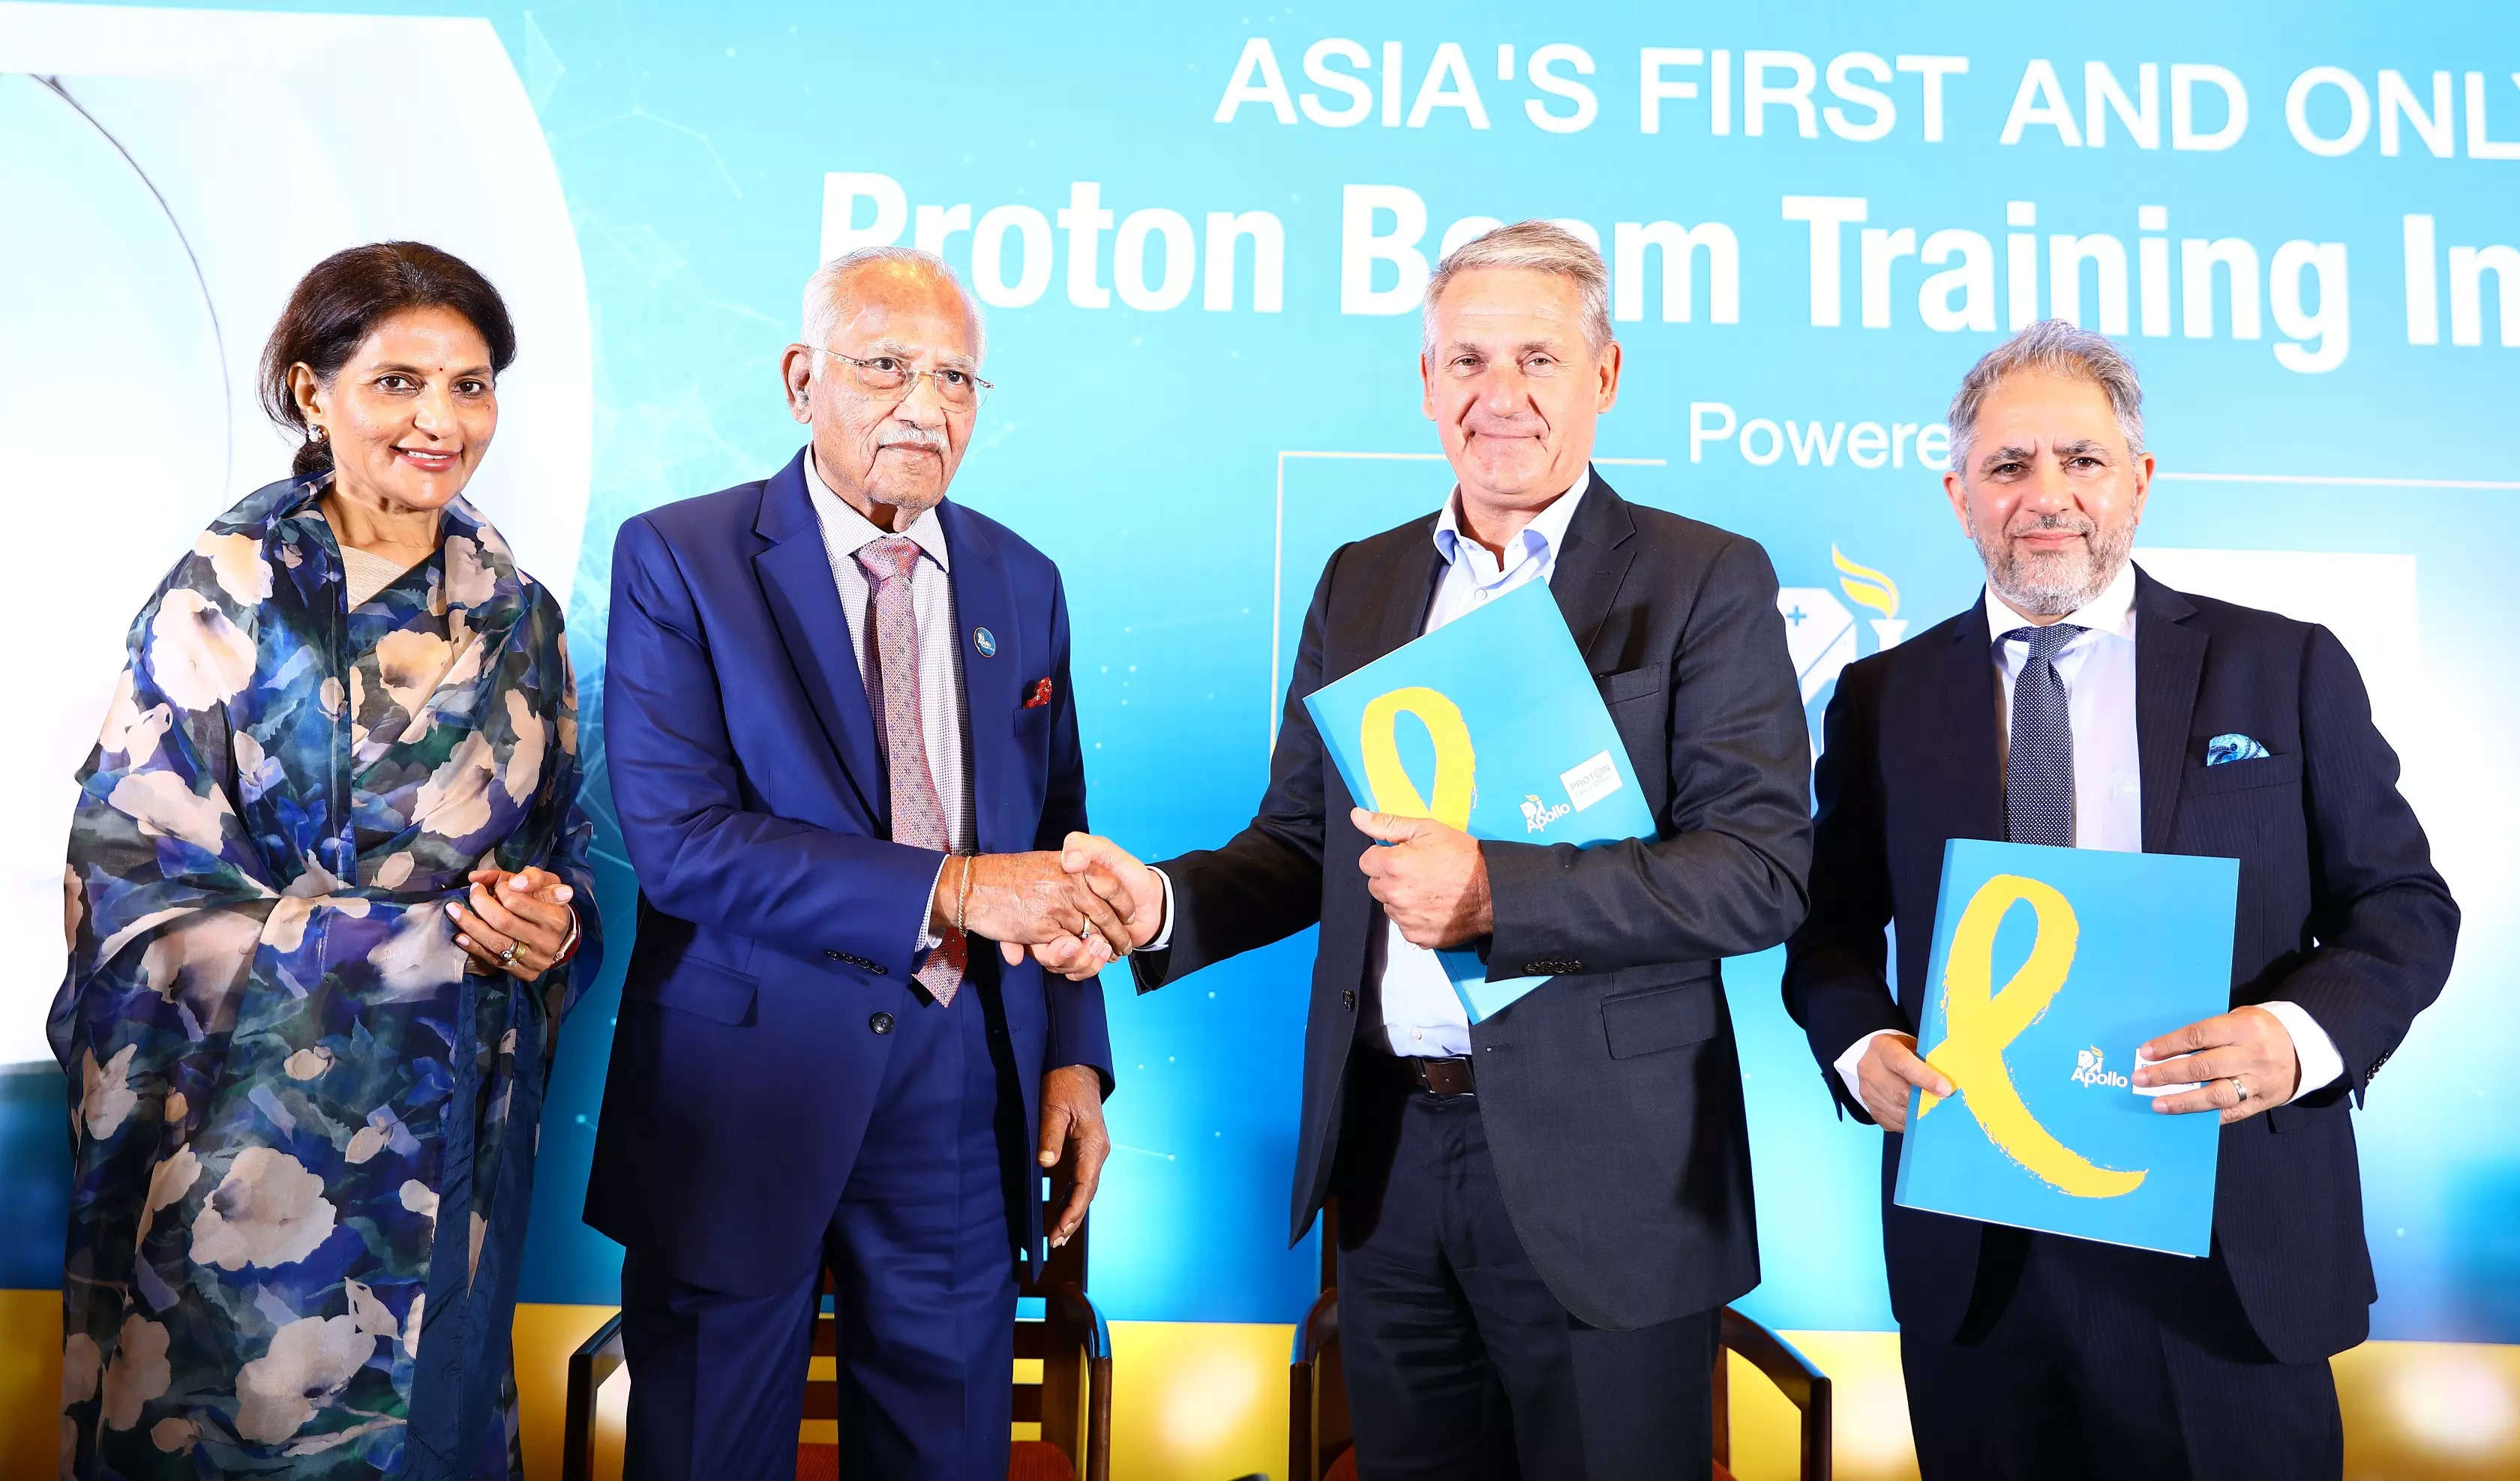 Apollo Proton Cancer Centre, Ion Beam Applications, Belgium, collaborate to offer proton therapy training education for clinicians